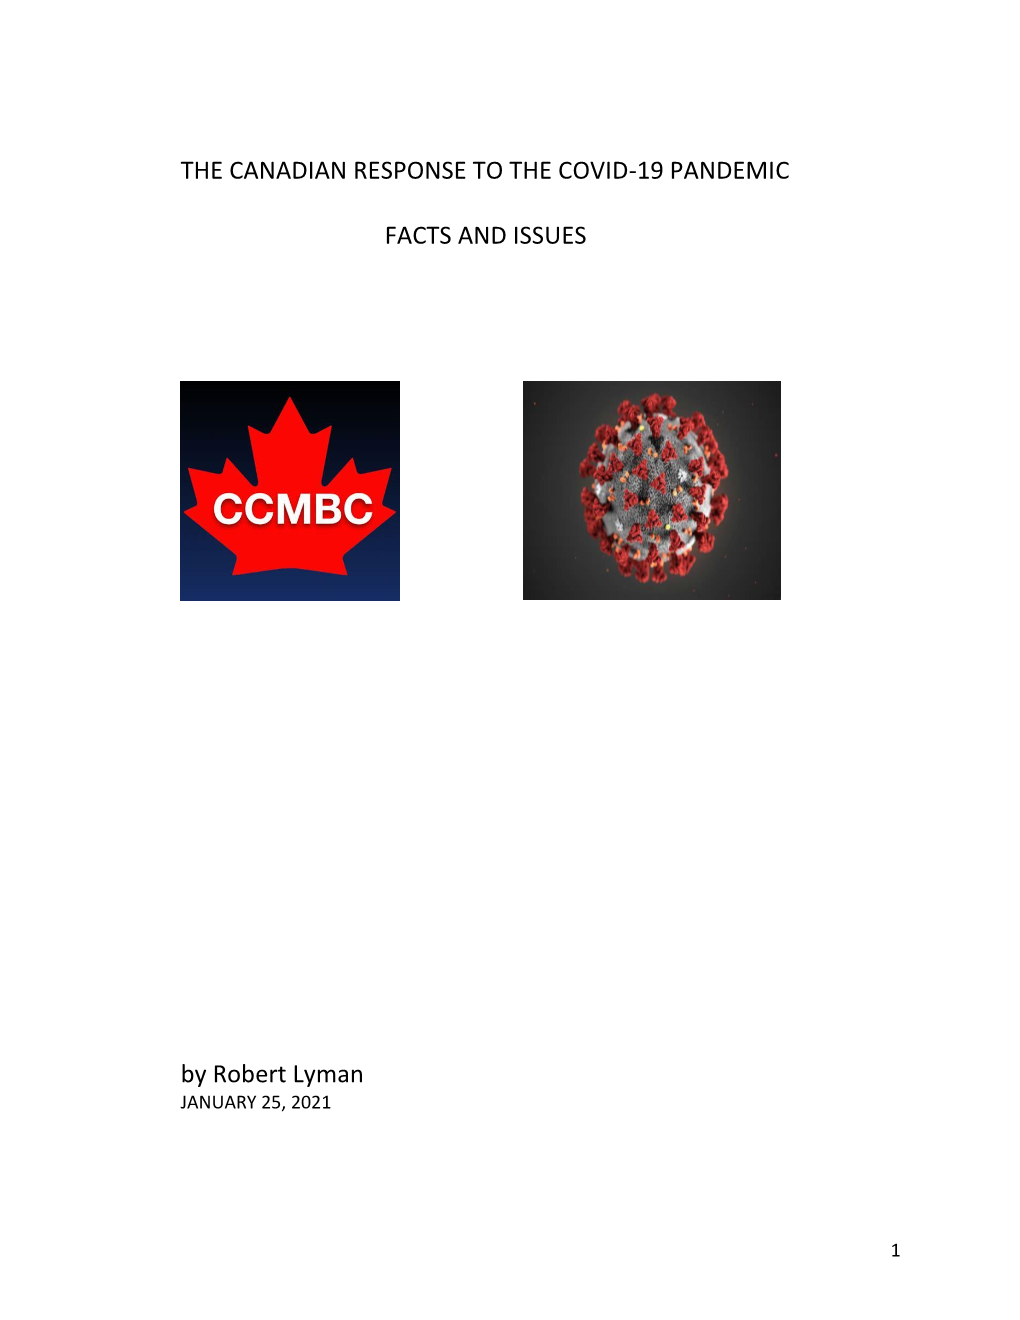 THE CANADIAN RESPONSE to the COVID-19 PANDEMIC FACTS and ISSUES by Robert Lyman